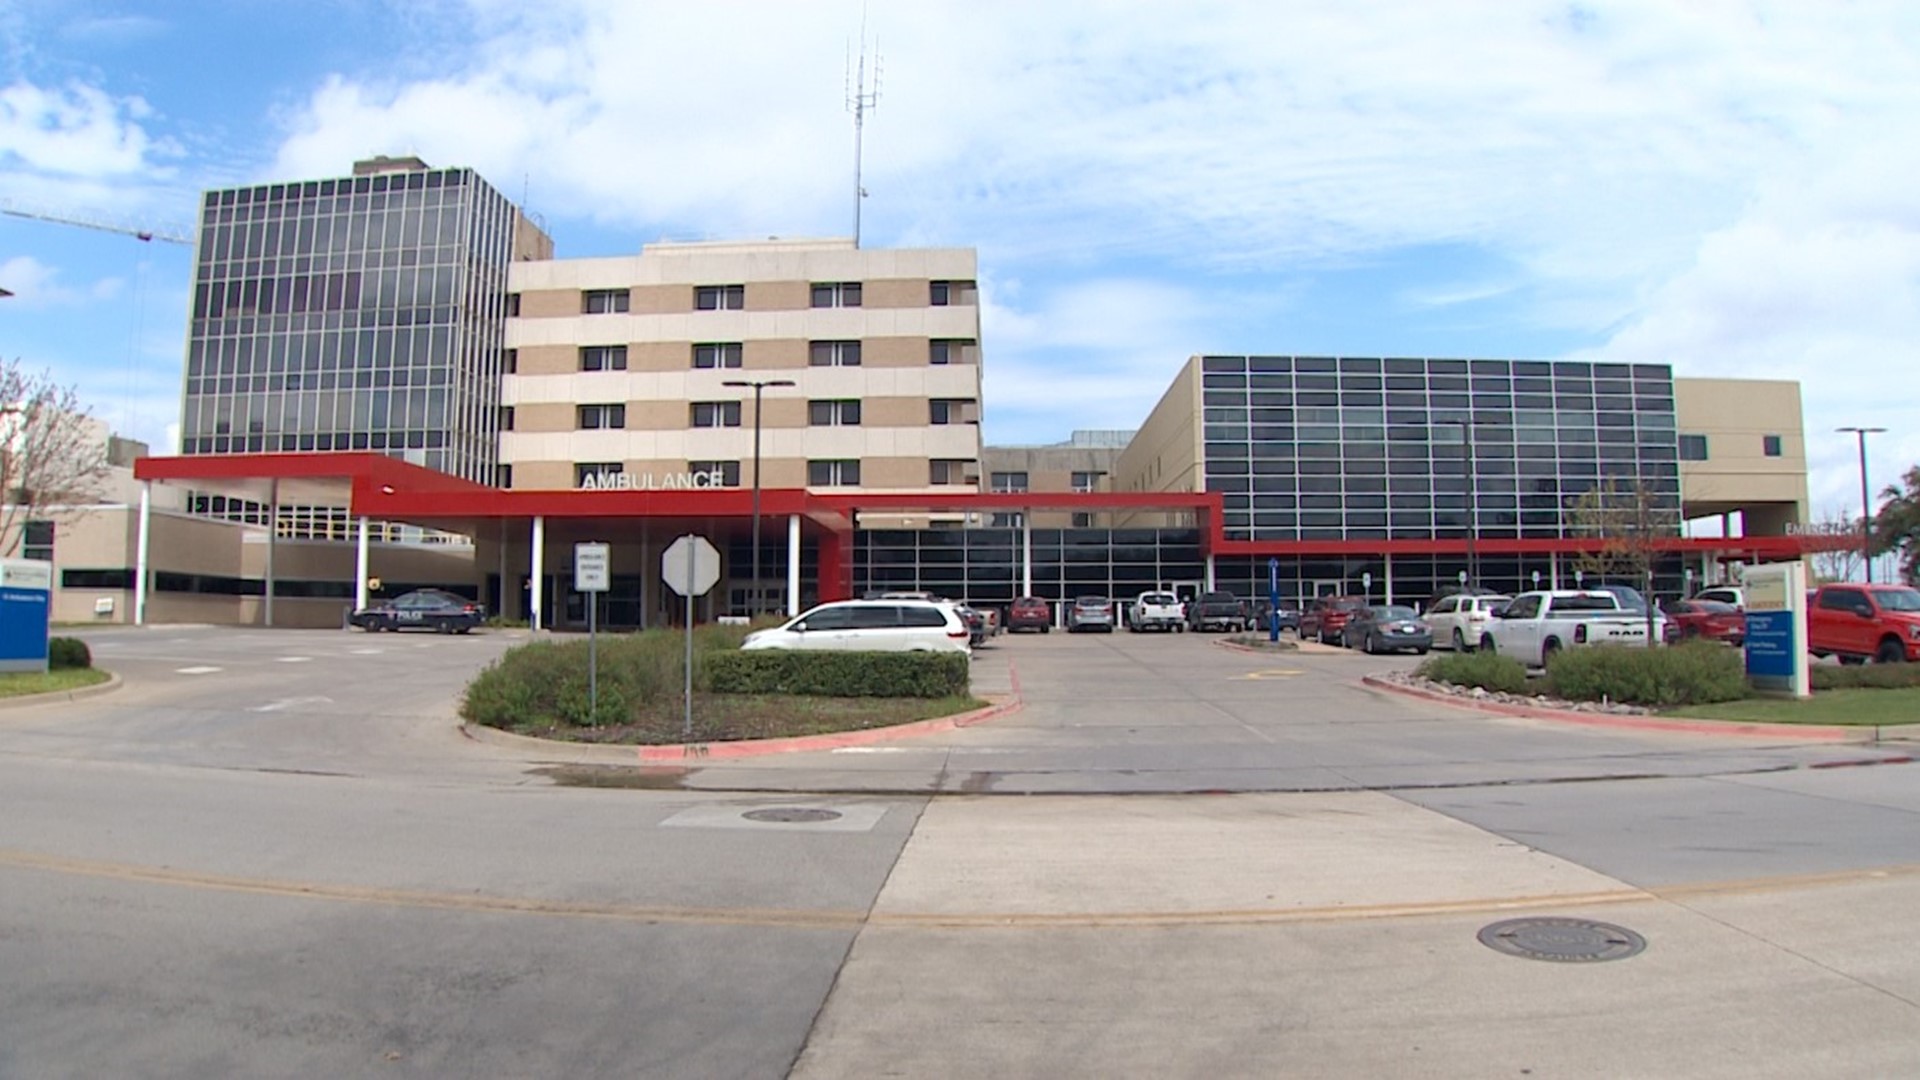 State health officials say 24% of hospital beds in the Dallas-Fort Worth area are available.